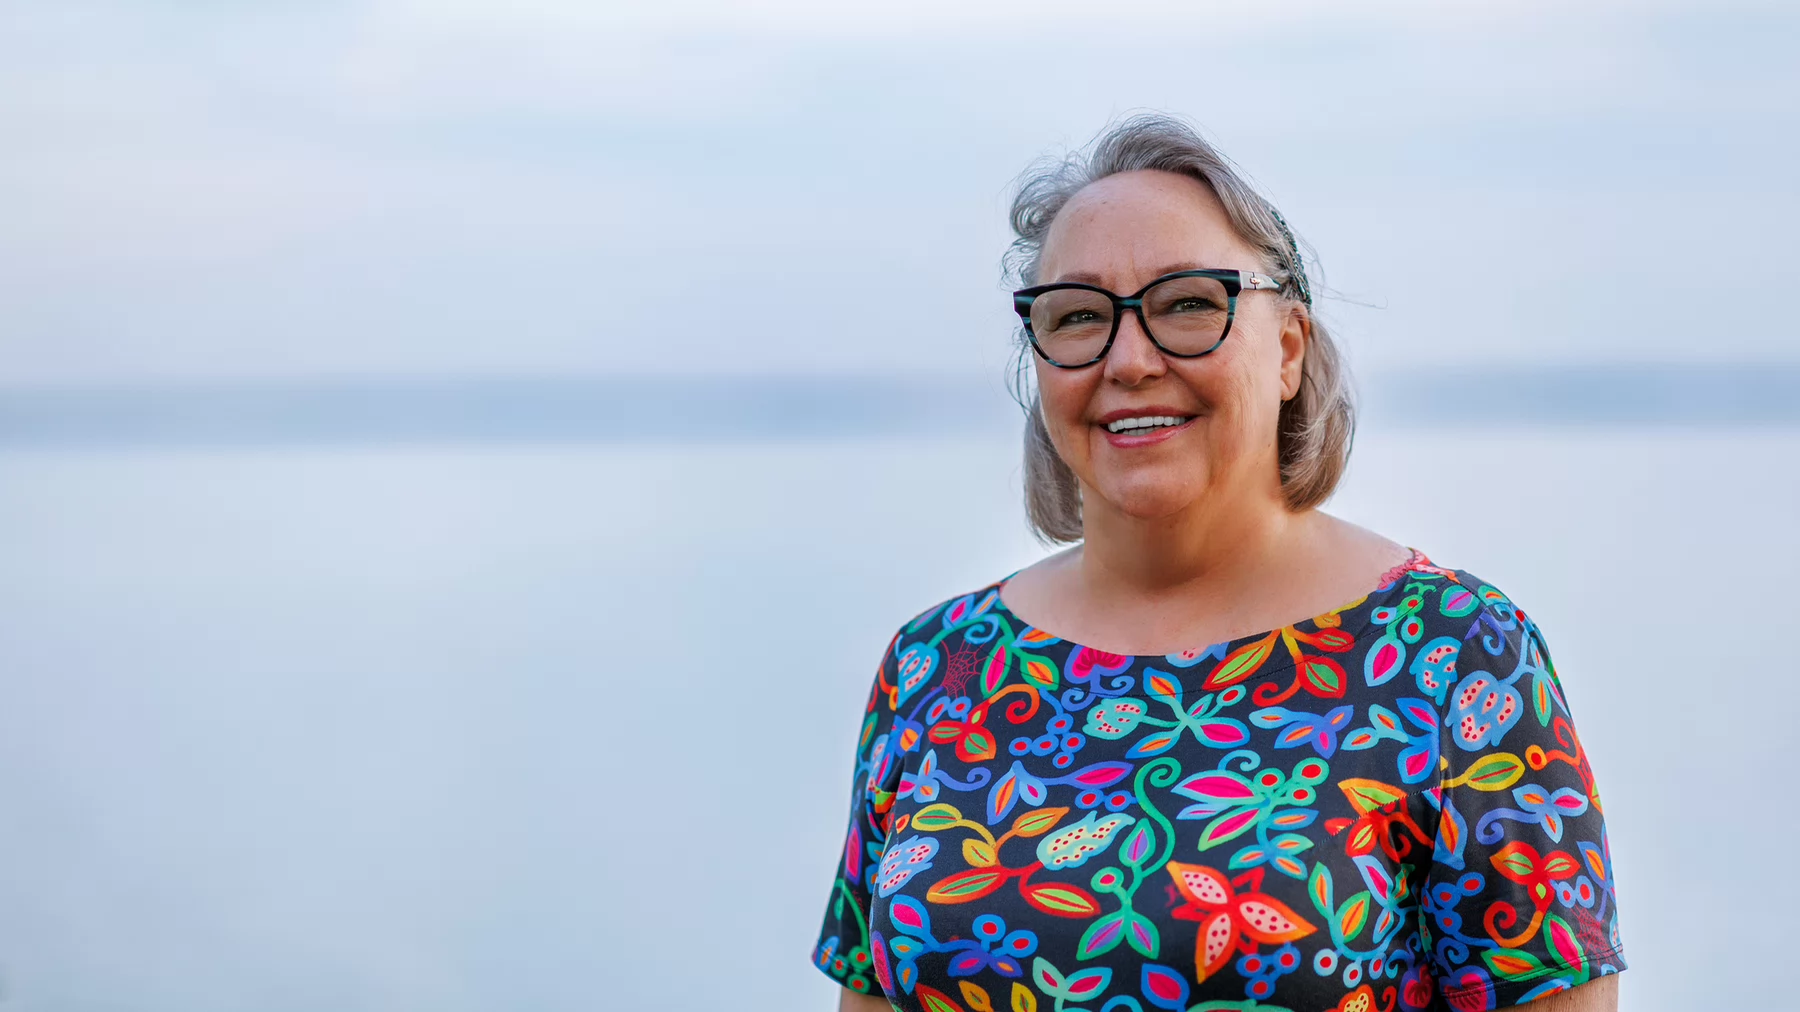 Siila Watt-Cloutier standing in front of a misty ocean wearing glasses and a colourful floral top with Indigenous designs.